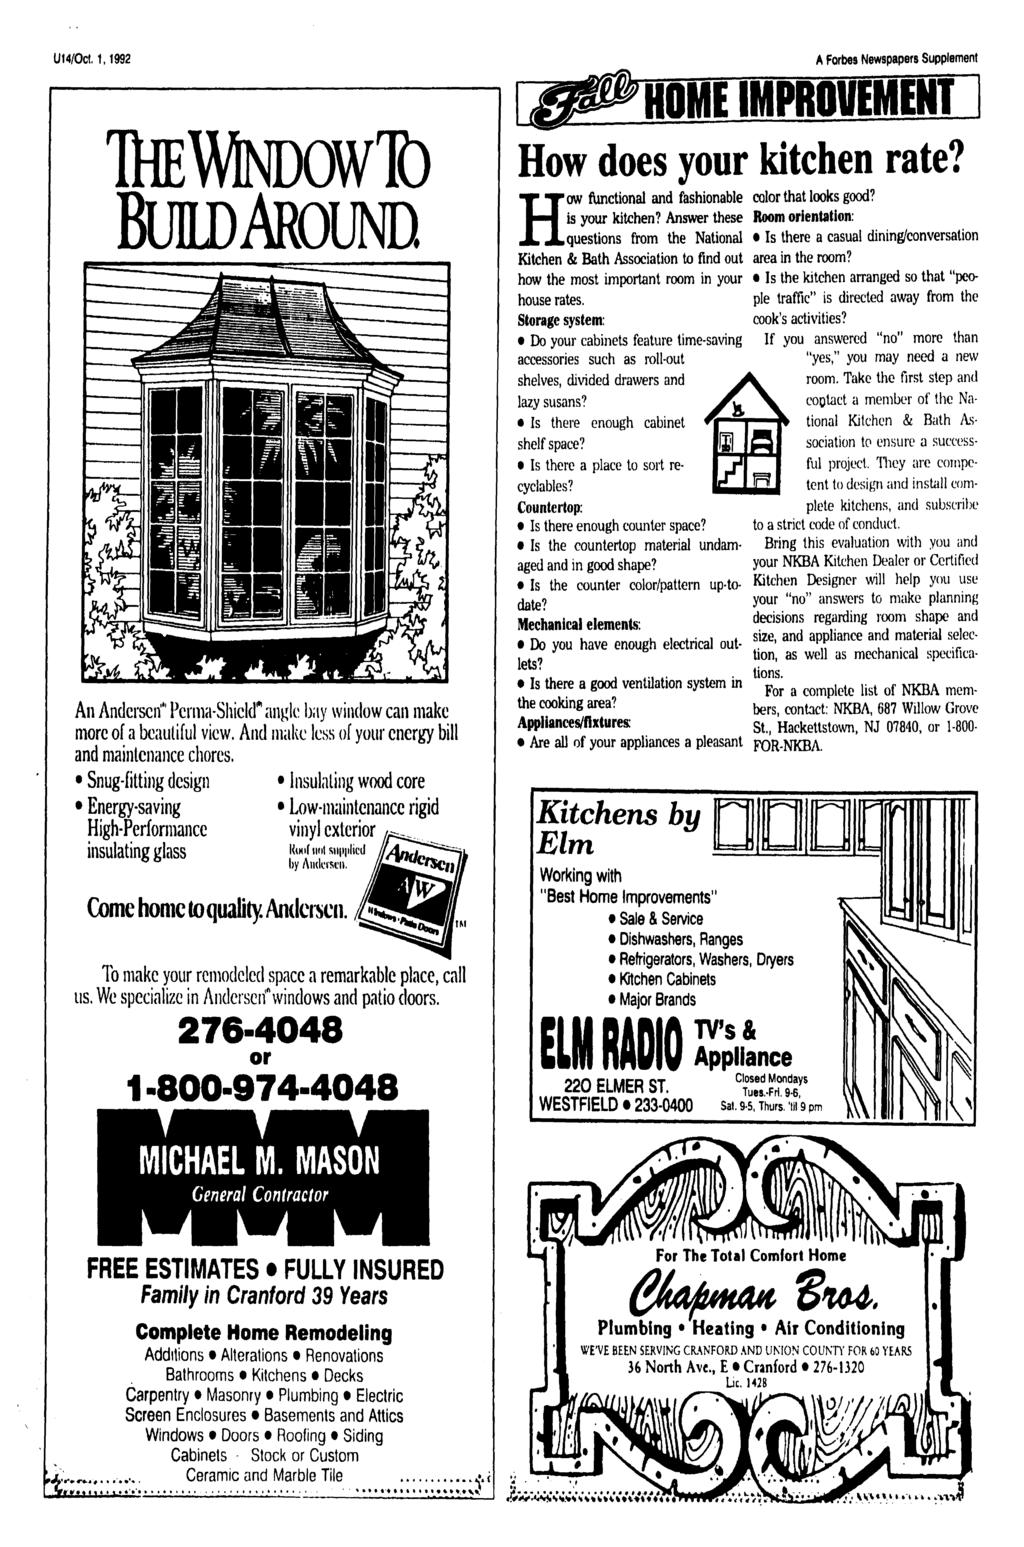 U14/0ct.1,1992 A Forbes Newspapers Supplement HOME MPROVEMENT ThEWlNDOWT) BUDAROUND An Andersen" 1 Pcrma-Shidd* angle bay window can make more of a beautiful view.